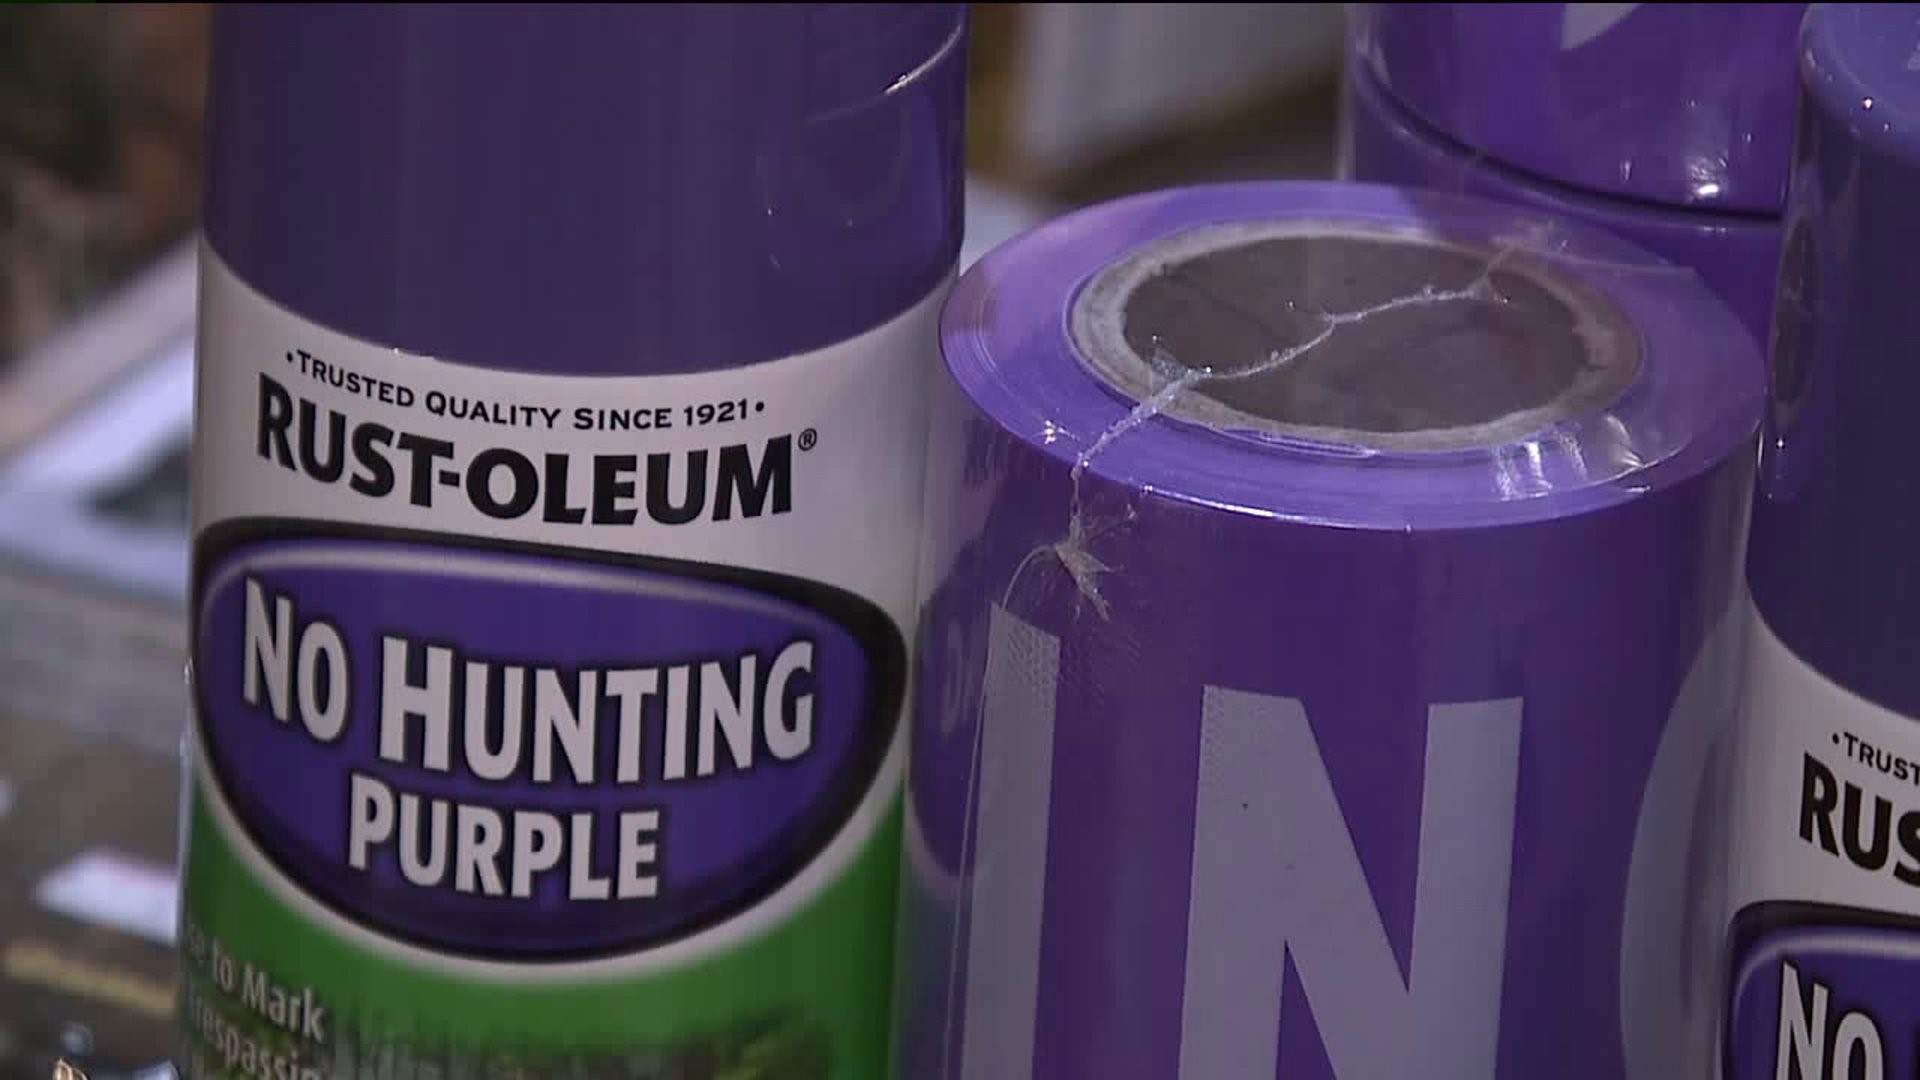 Purple Paint Now an Alternative for No Trespassing Signs